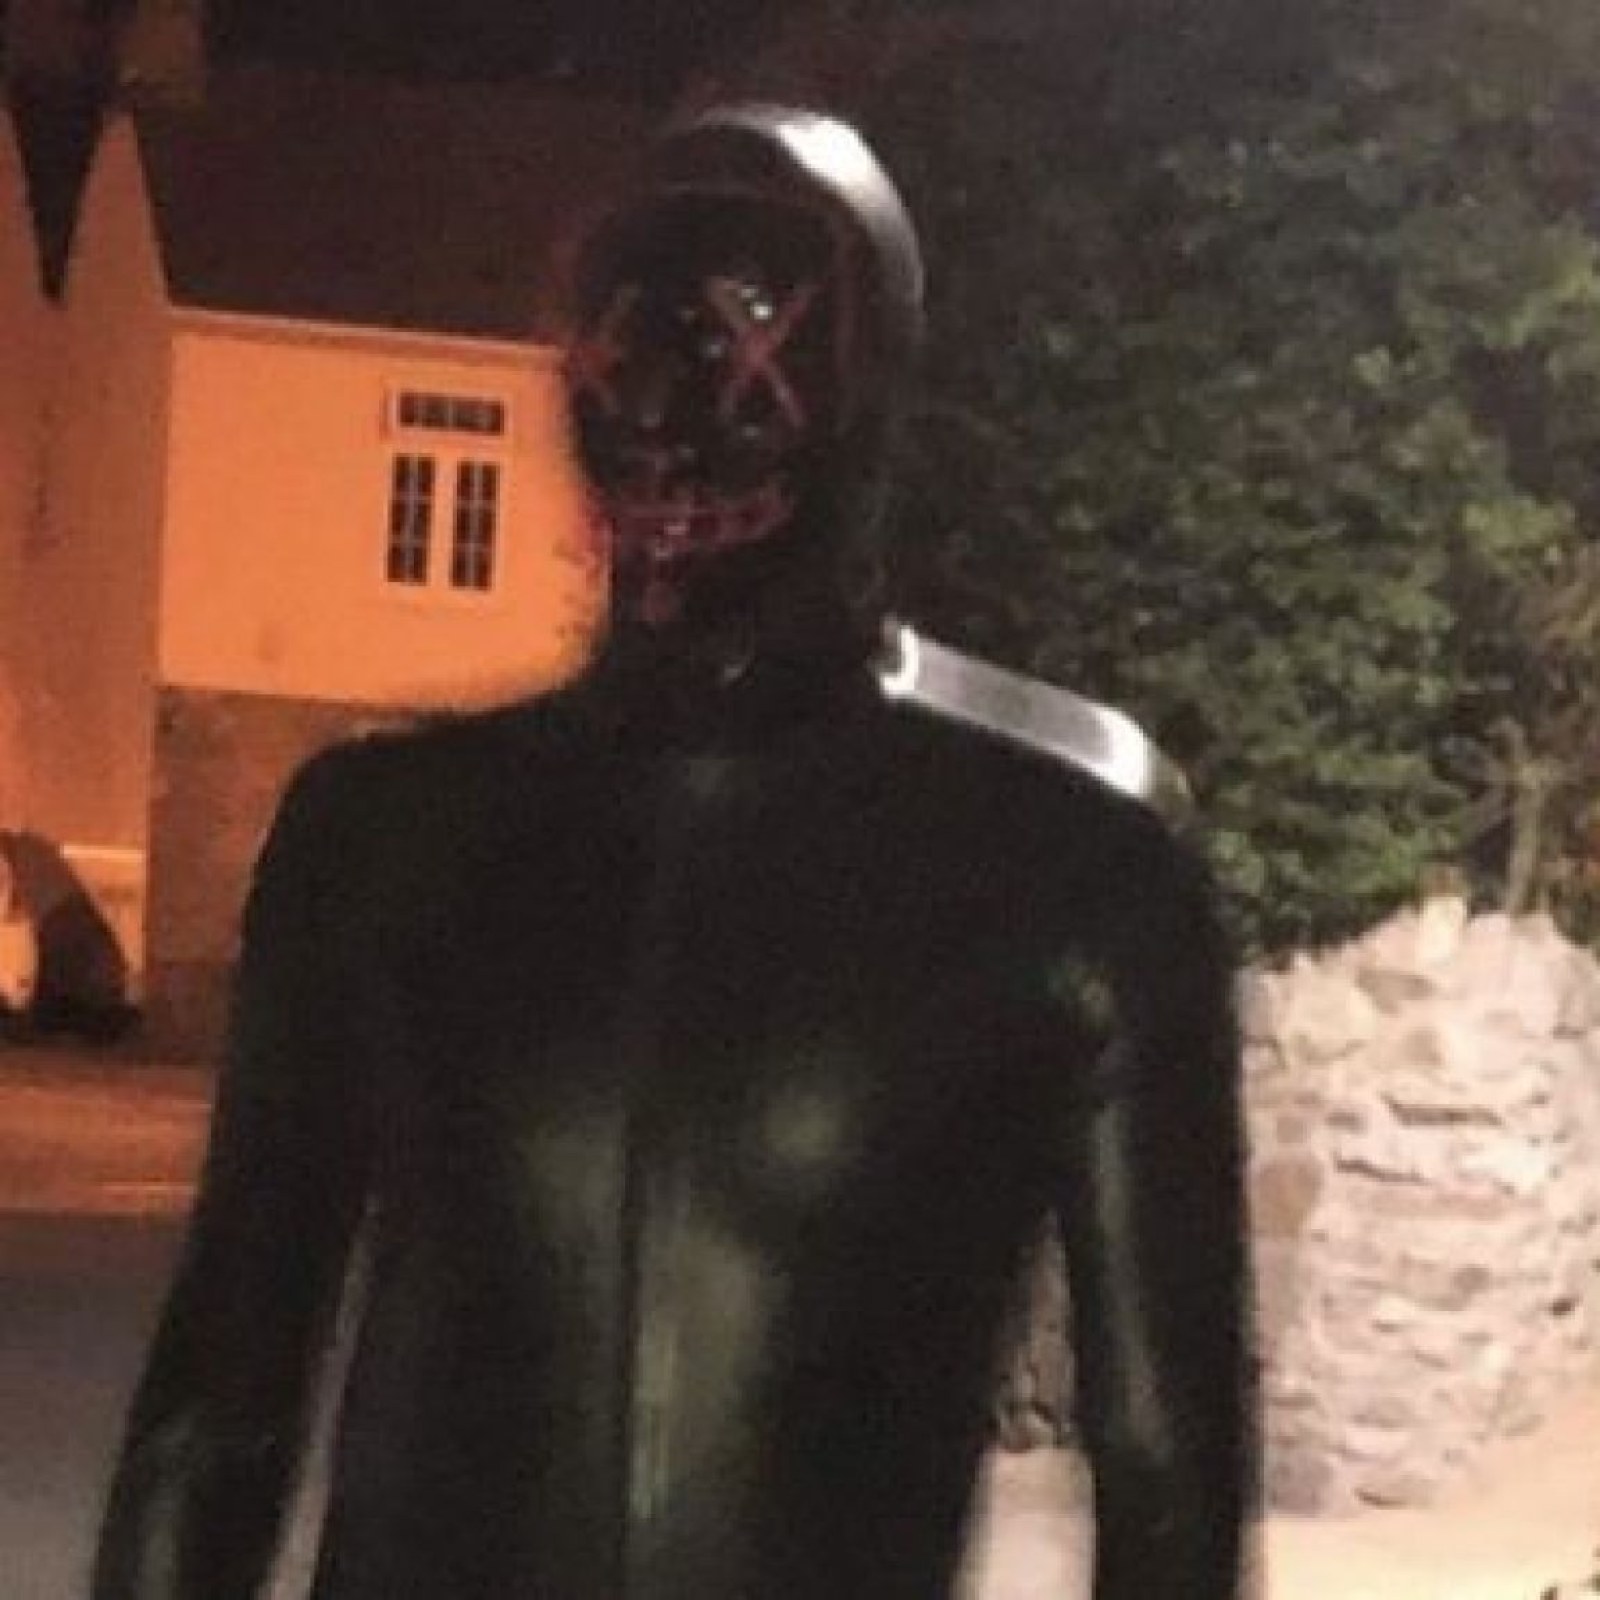 Beringstraat Handvest Airco Man In Rubber 'Gimp' Suit Terrorizes Small English Town